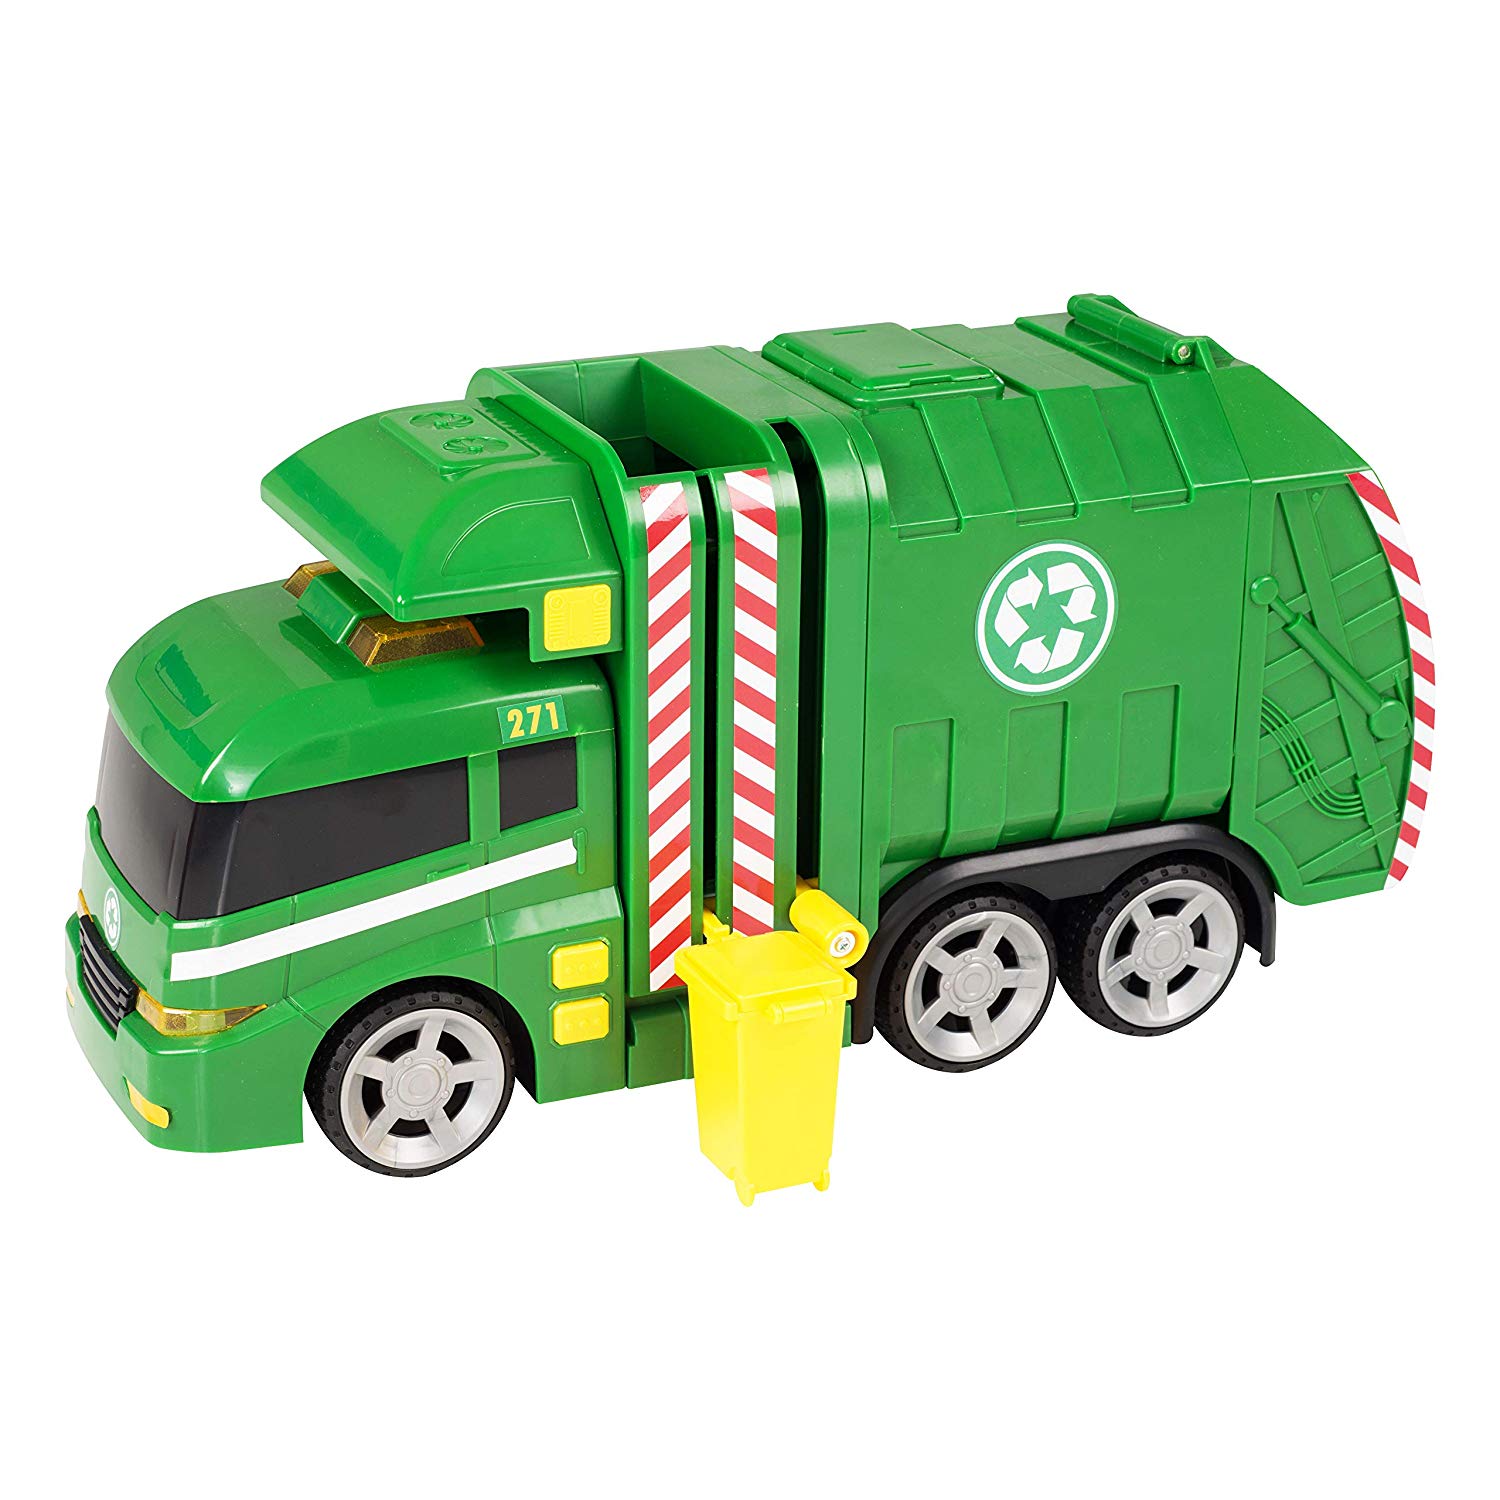 Teamsterz 1416391 Light and Sound Garbage Truck Toy 3-10 Years 